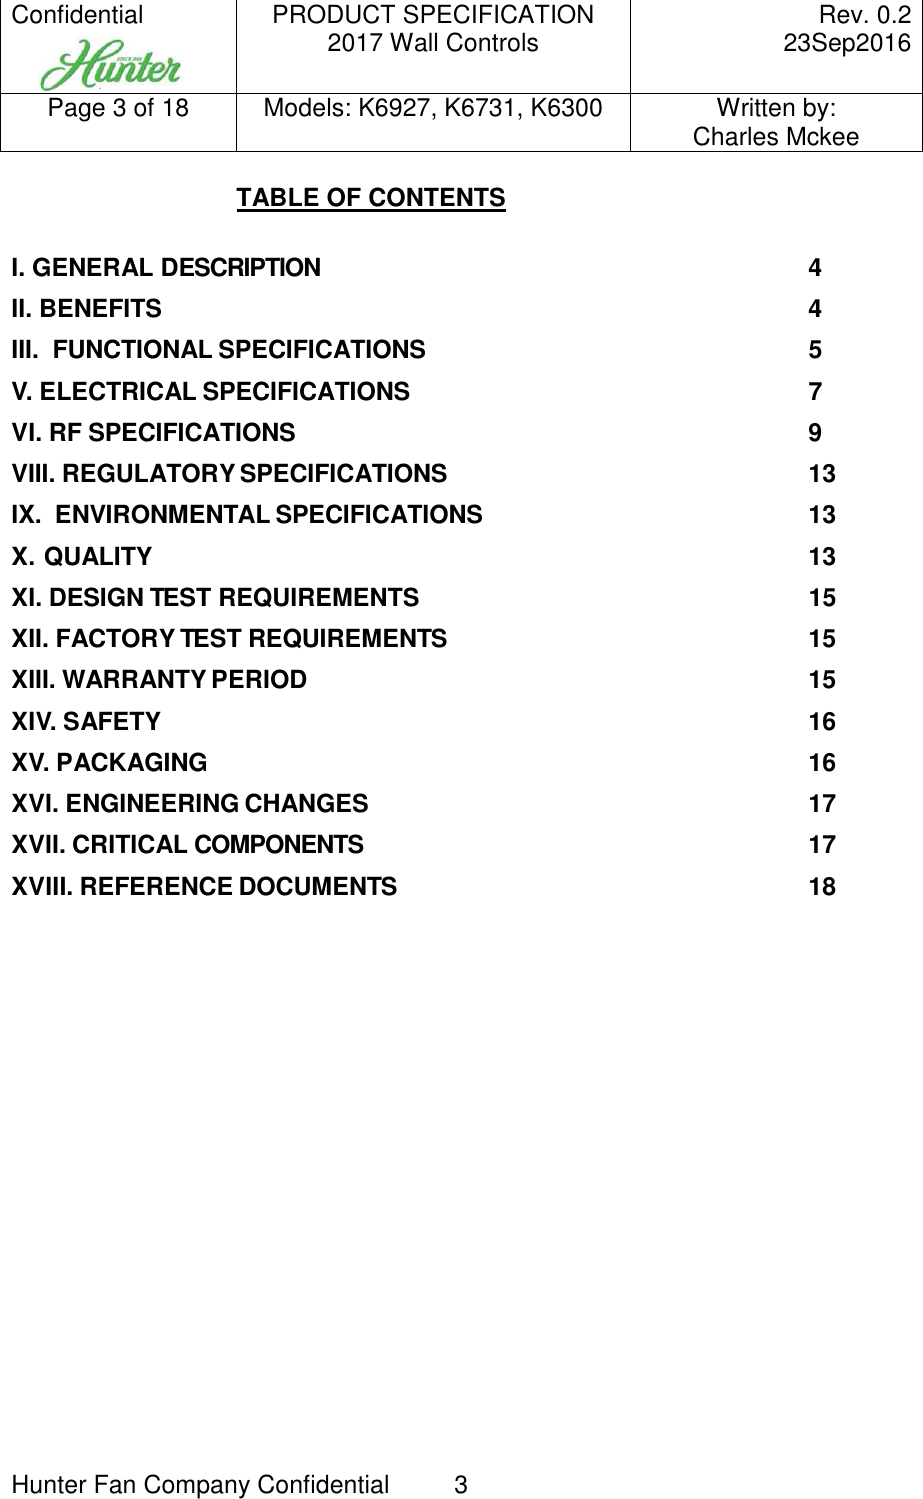 Confidential     PRODUCT SPECIFICATION 2017 Wall Controls  Rev. 0.2     23Sep2016 Page 3 of 18  Models: K6927, K6731, K6300  Written by: Charles Mckee  Hunter Fan Company Confidential  3  TABLE OF CONTENTS  I. GENERAL DESCRIPTION  4 II. BENEFITS  4 III.  FUNCTIONAL SPECIFICATIONS  5 V. ELECTRICAL SPECIFICATIONS  7 VI. RF SPECIFICATIONS  9 VIII. REGULATORY SPECIFICATIONS  13 IX.  ENVIRONMENTAL SPECIFICATIONS  13 X. QUALITY  13 XI. DESIGN TEST REQUIREMENTS  15 XII. FACTORY TEST REQUIREMENTS  15 XIII. WARRANTY PERIOD  15 XIV. SAFETY  16 XV. PACKAGING  16 XVI. ENGINEERING CHANGES  17 XVII. CRITICAL COMPONENTS  17 XVIII. REFERENCE DOCUMENTS  18          